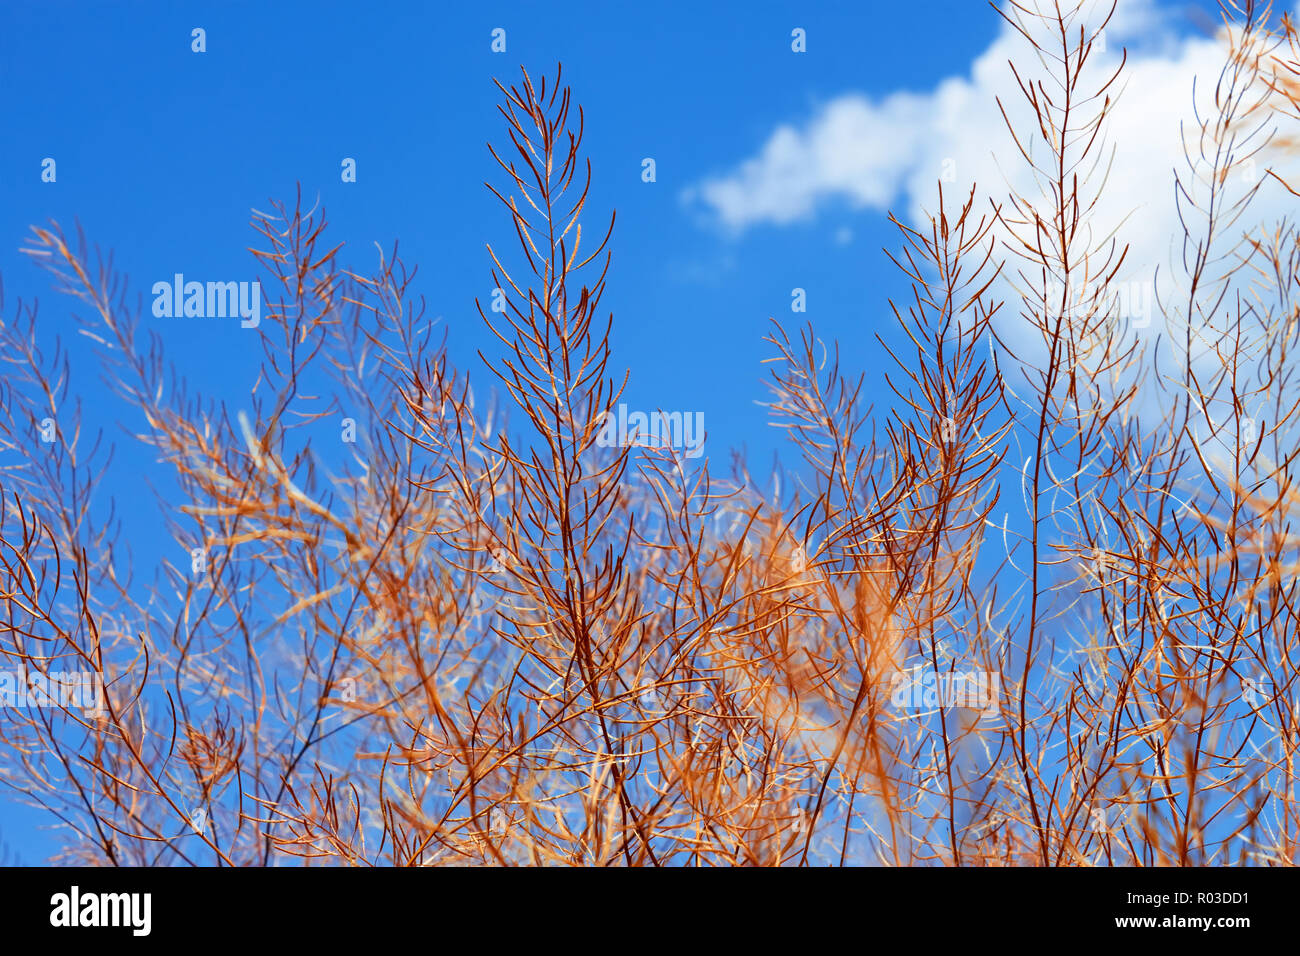 Dried pods with seeds of plants from the family Cruciferae against the blue sky Stock Photo